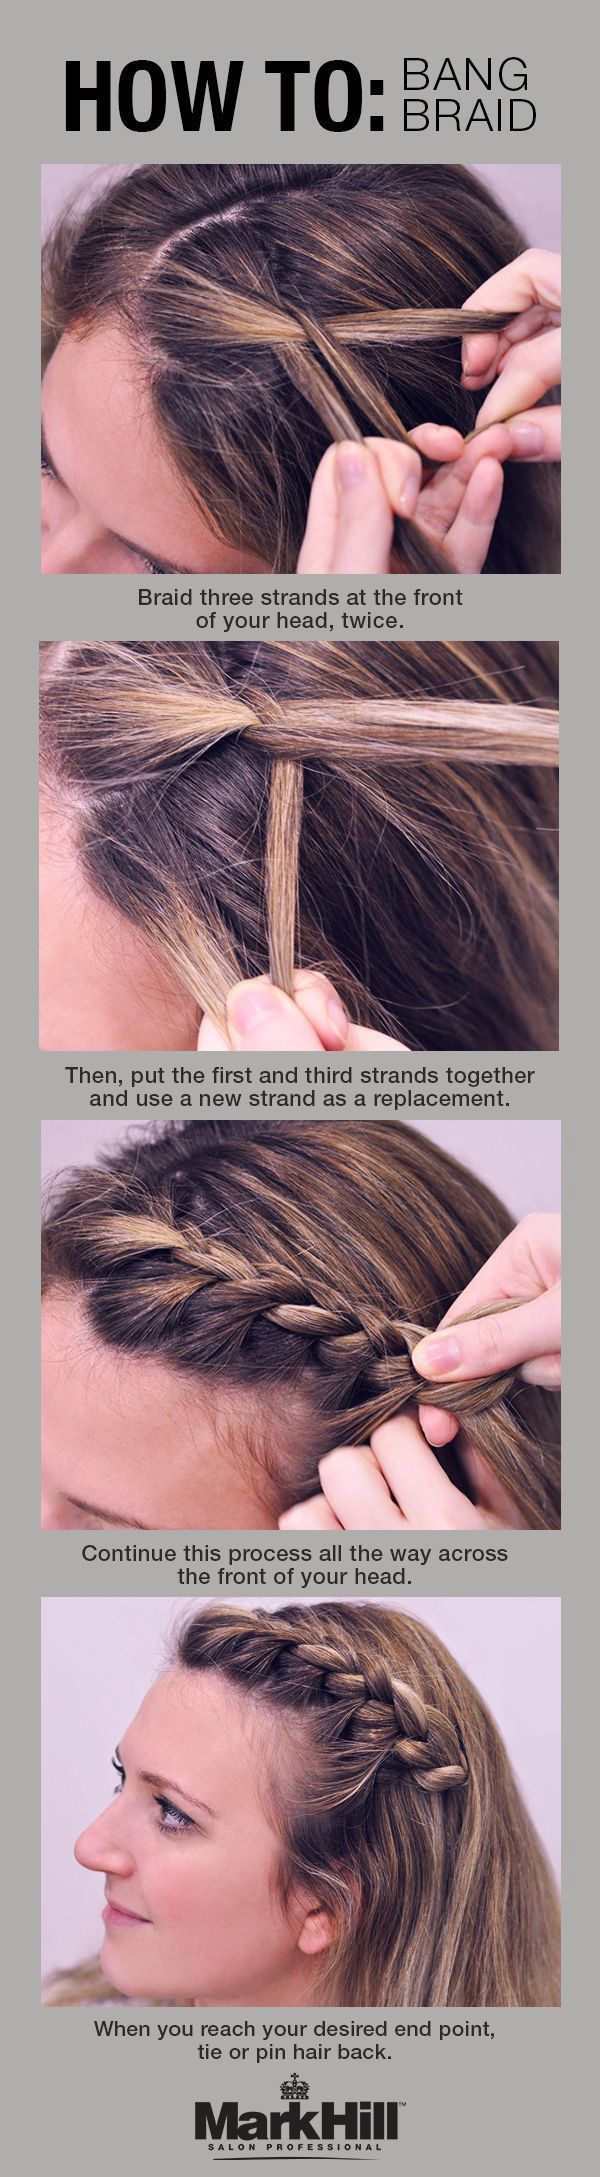 14-easy-braided-hairstyles-and-step-by-step-tutorials.jpg